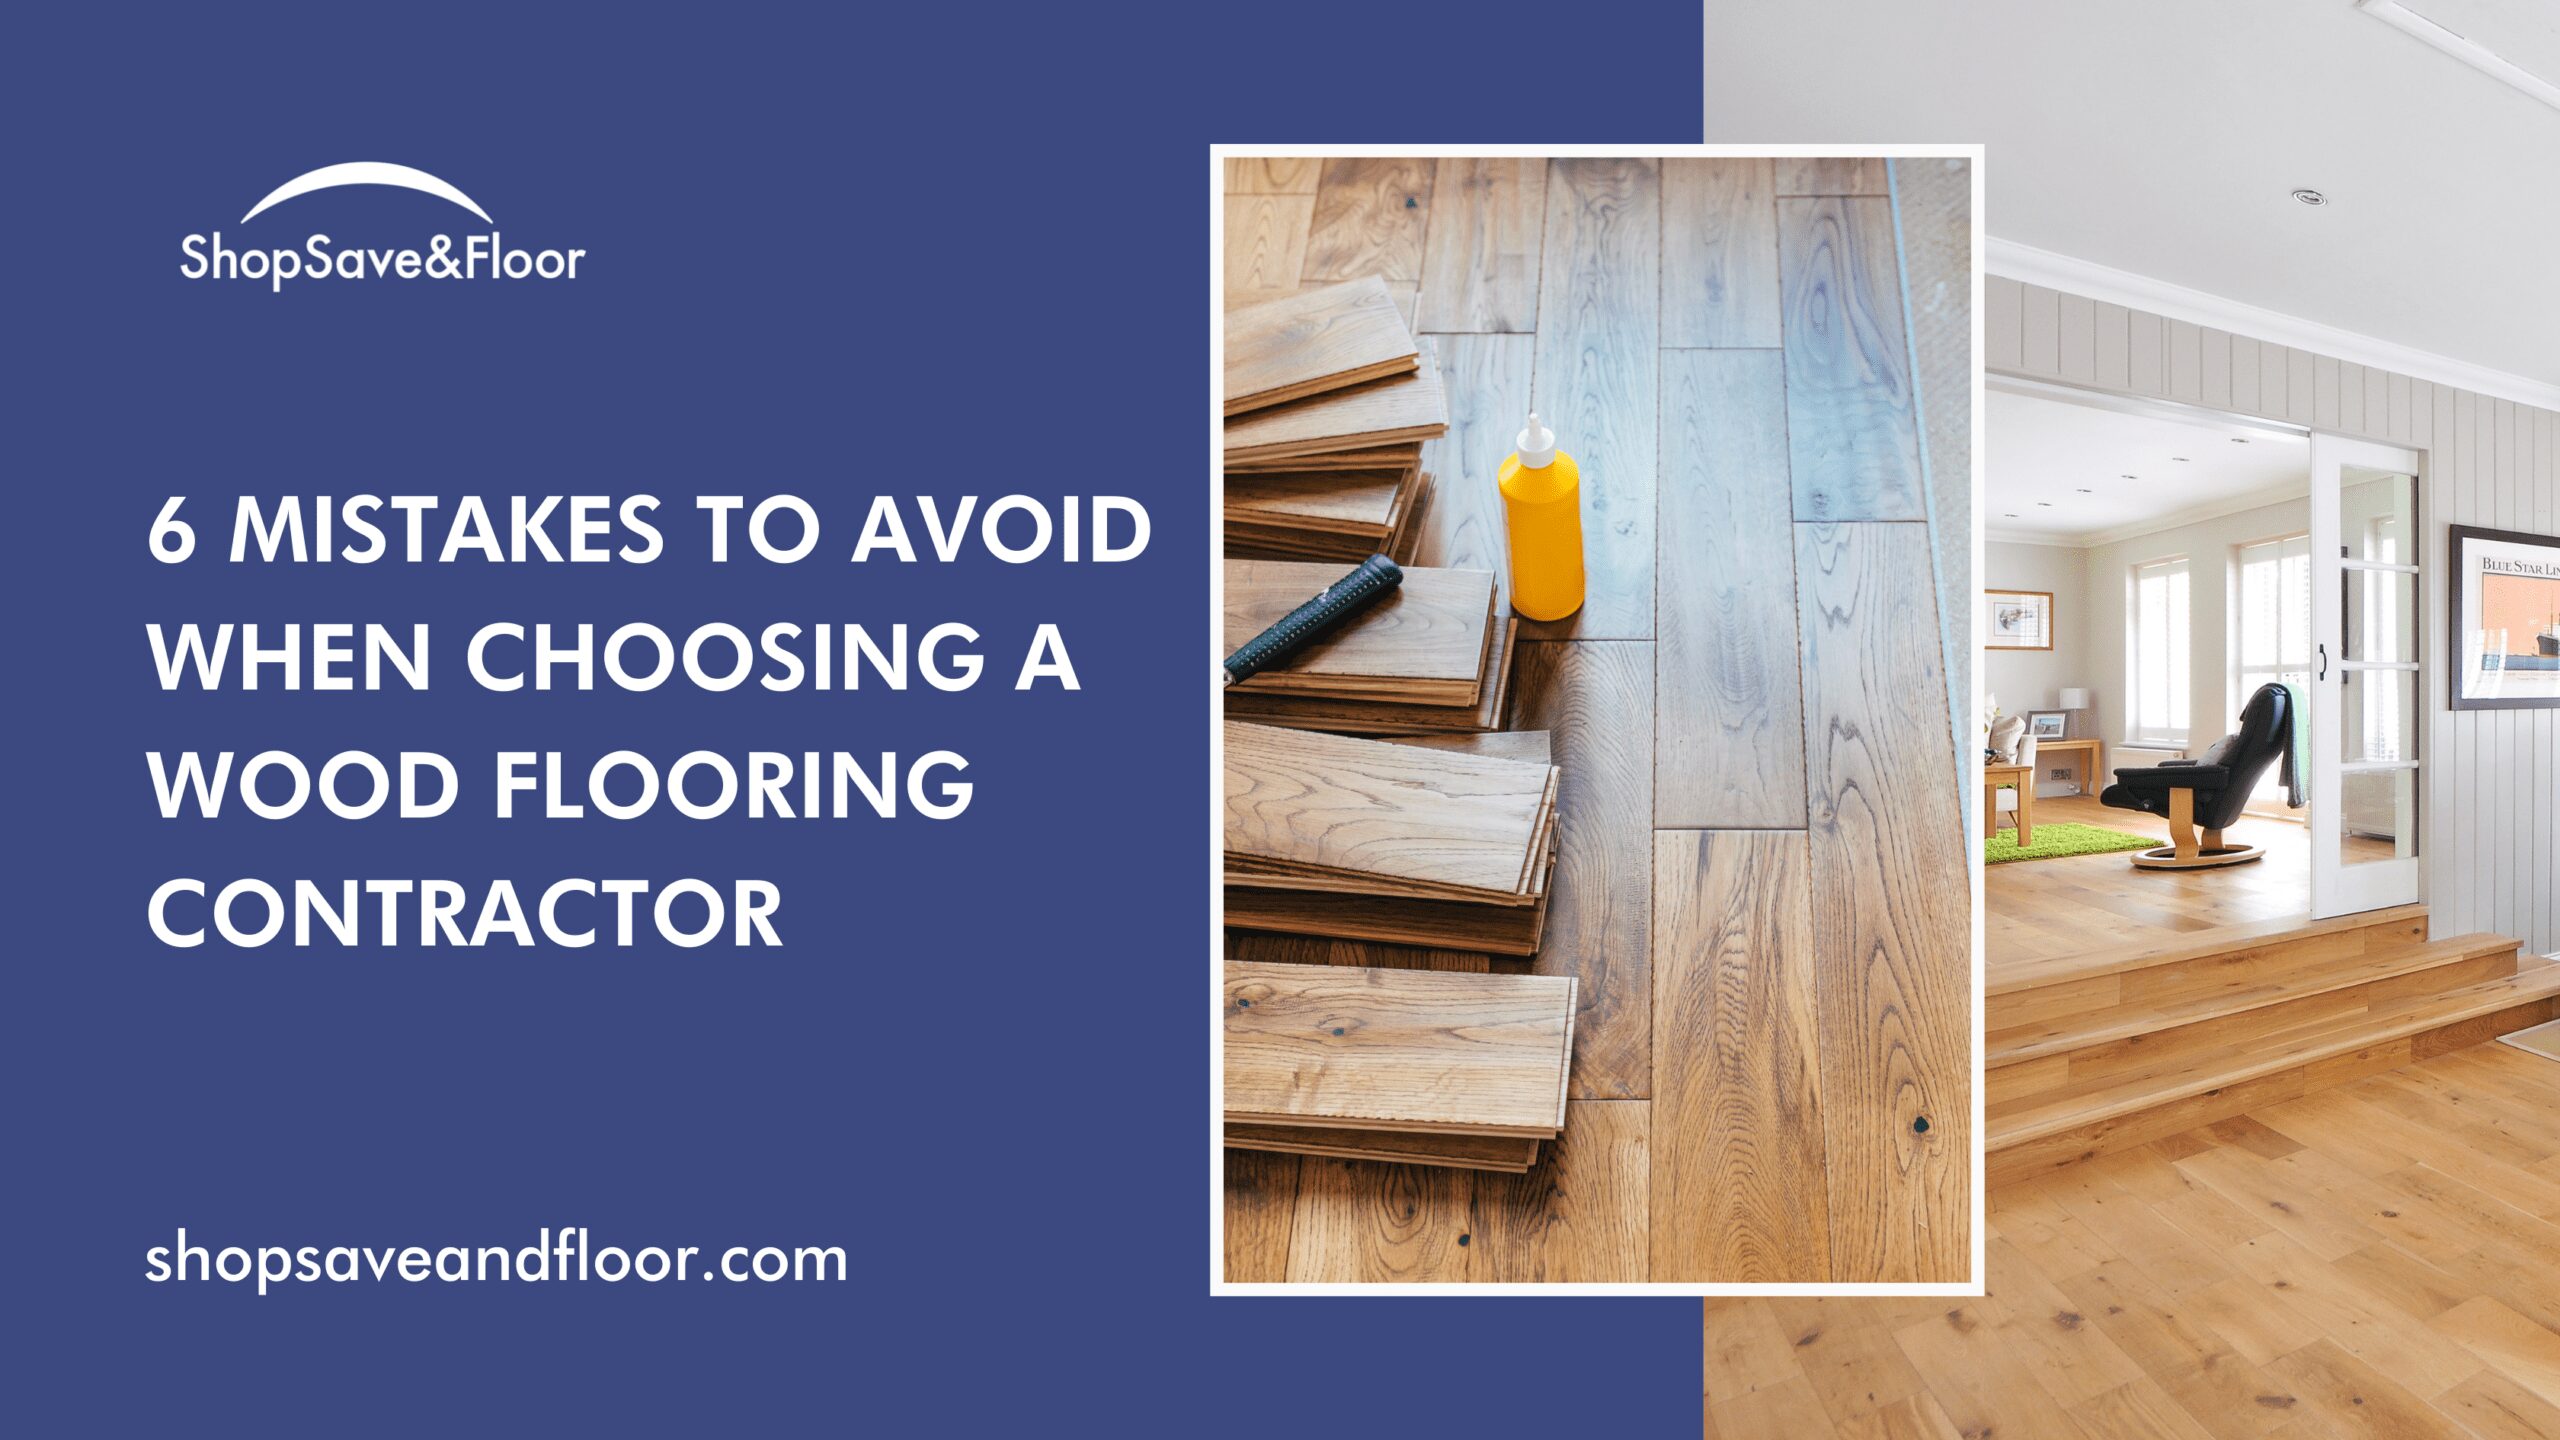 6-Mistakes-to-Avoid-When-Choosing-a-Wood-Flooring-Contractor